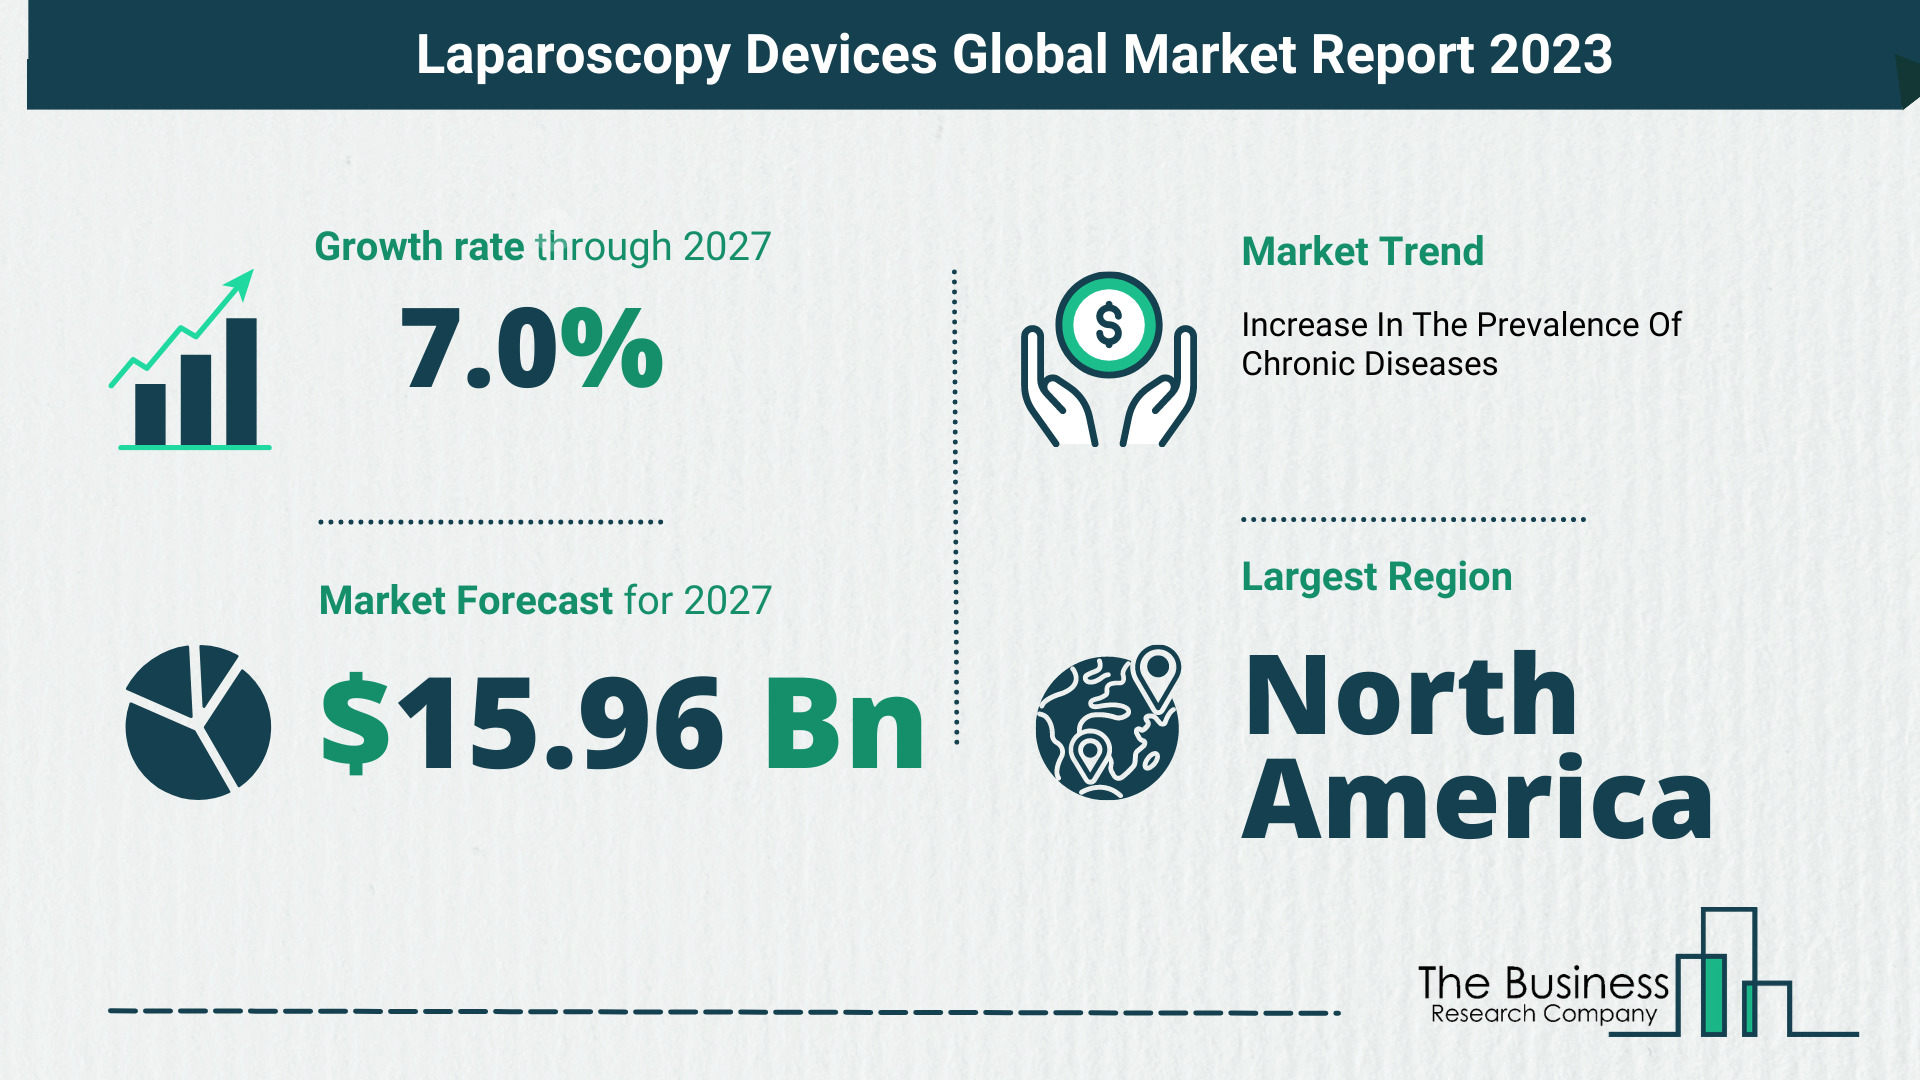 How Will The Laparoscopy Devices Market Globally Expand In 2023?